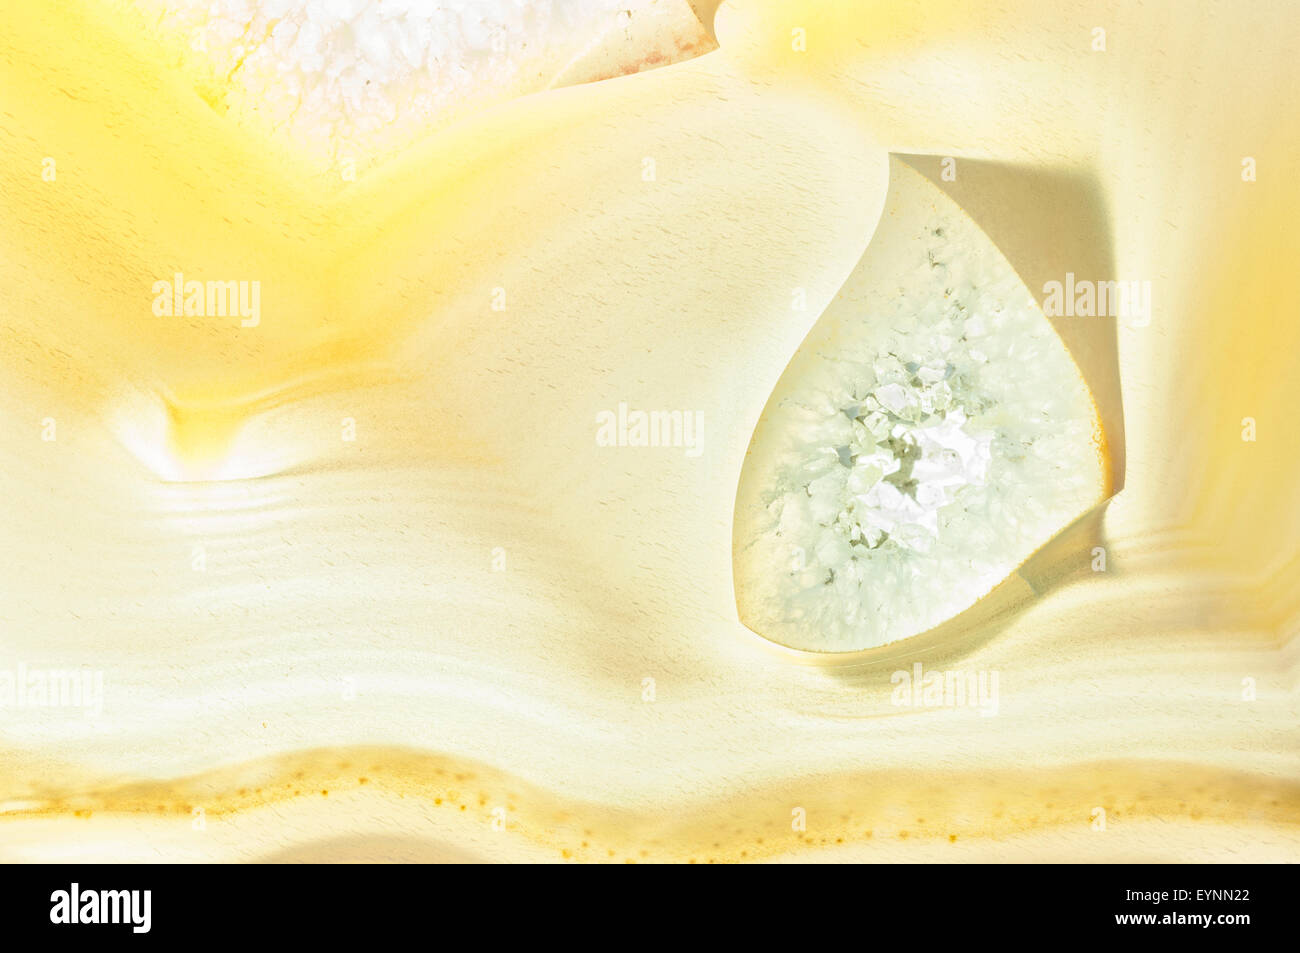 Abstract agate stone texture background Stock Photo